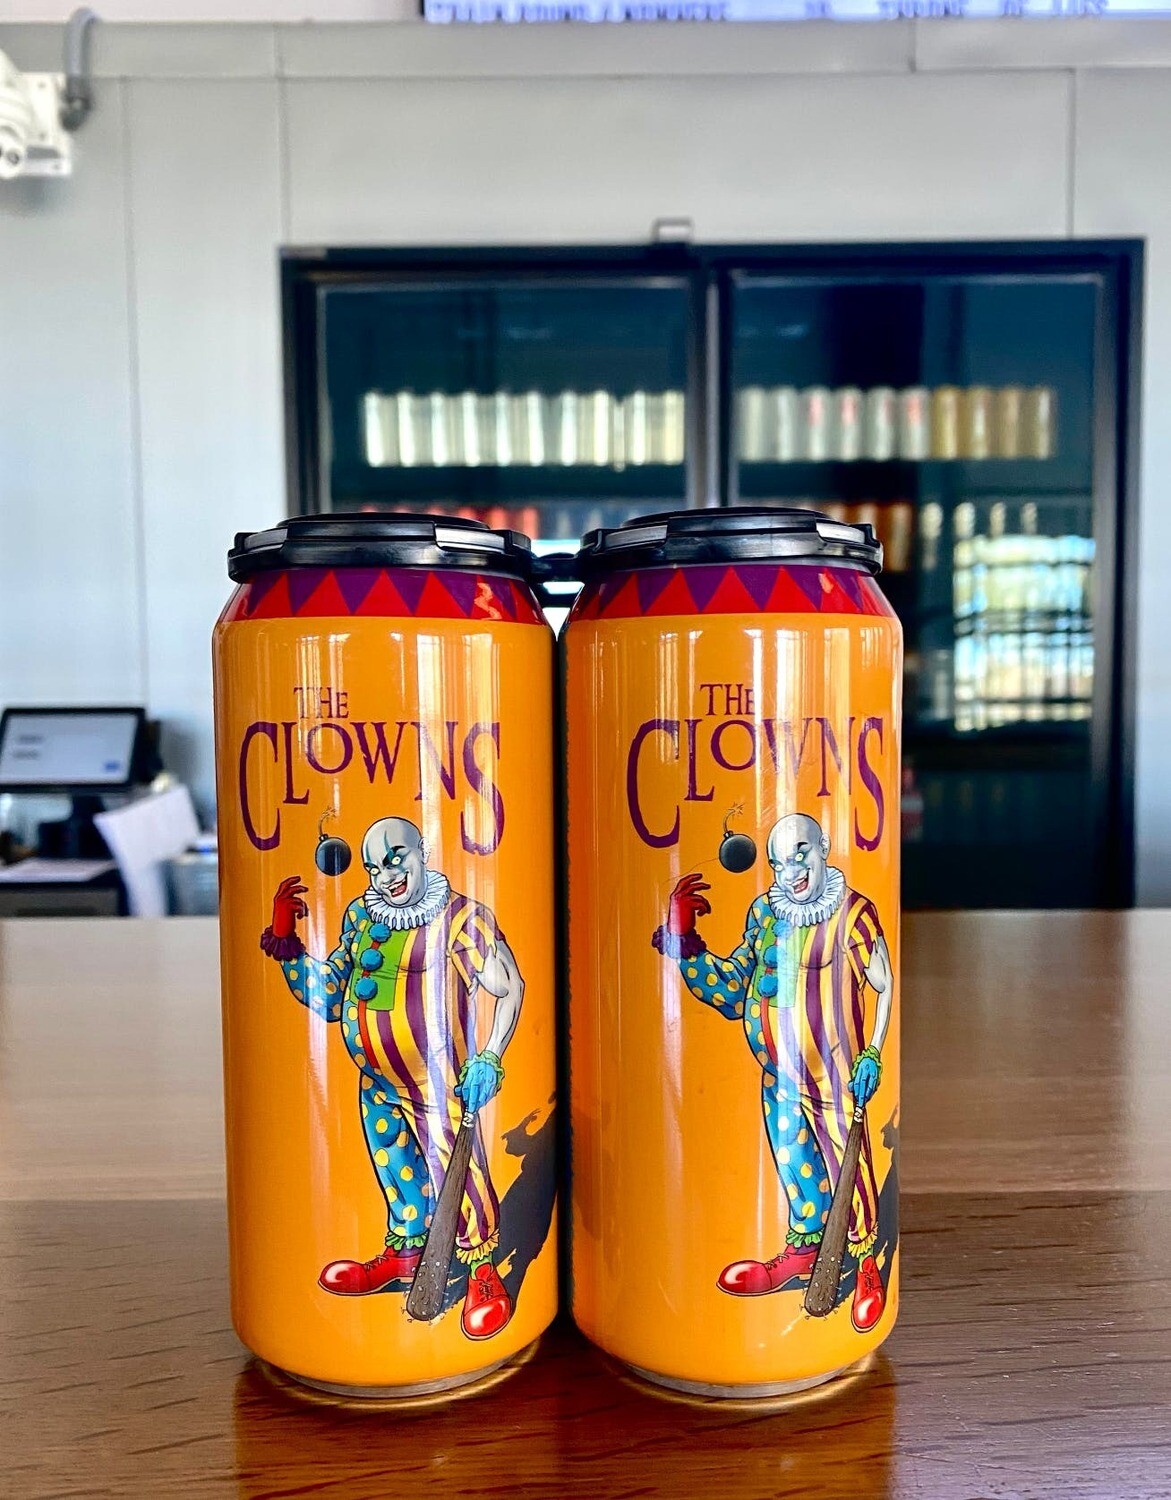 New Anthem “The Clowns” Imperial Milk Stout